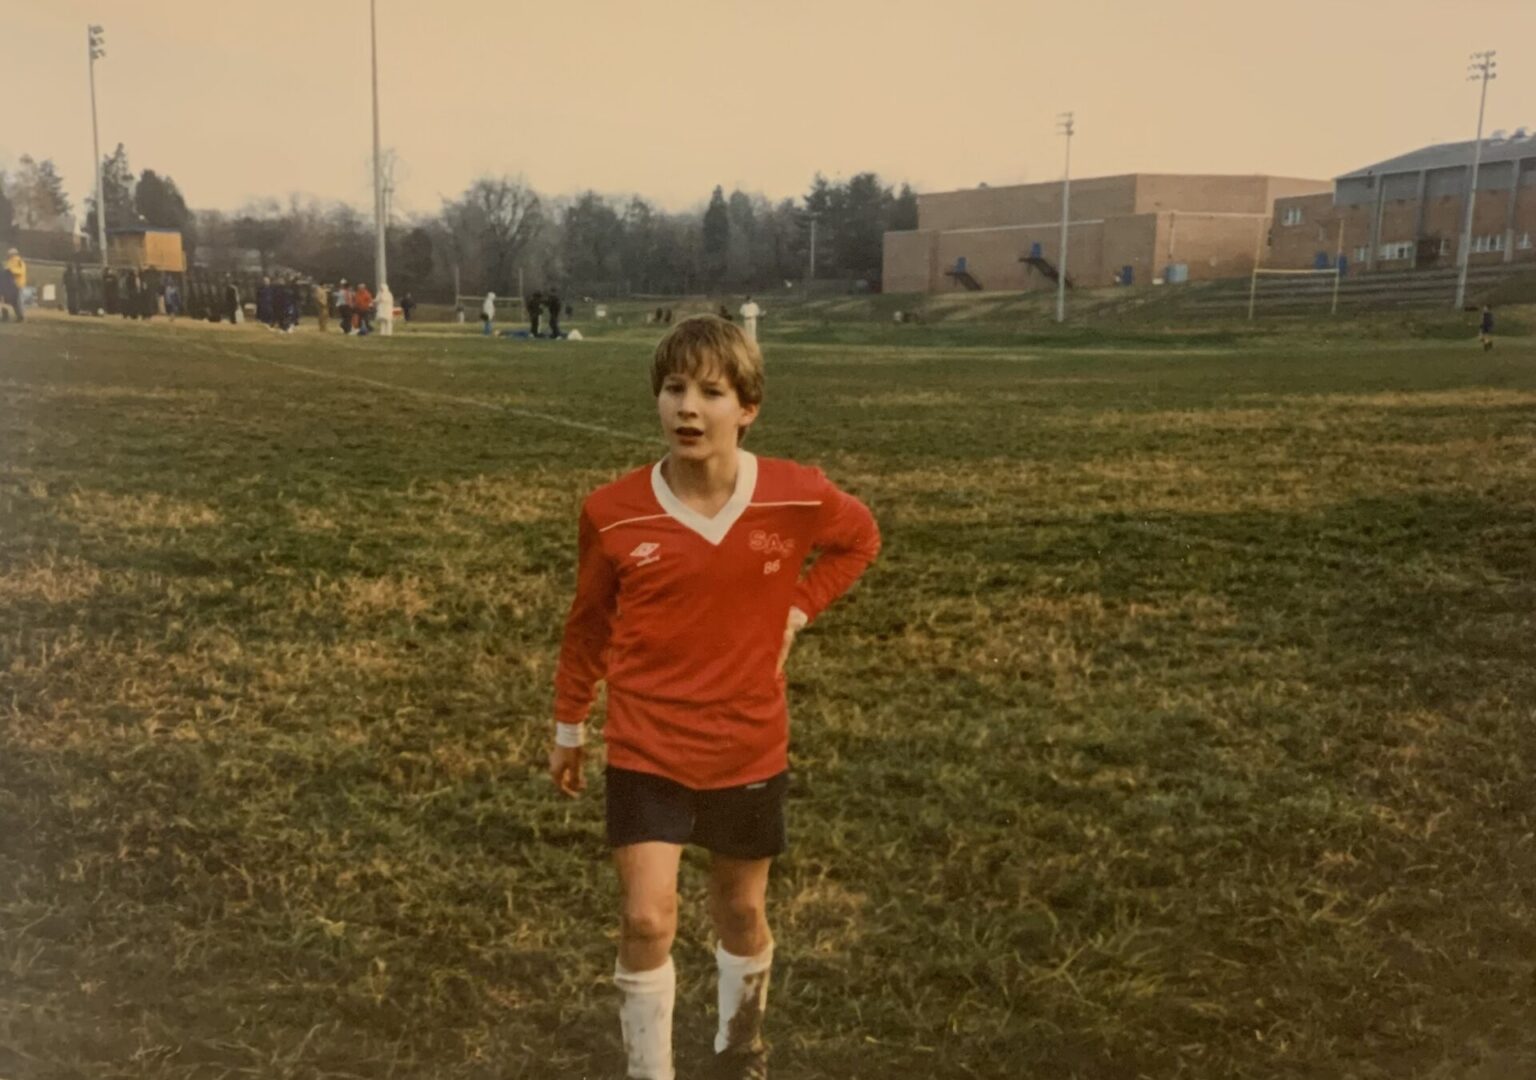 Soccer Player walking through the mid-field